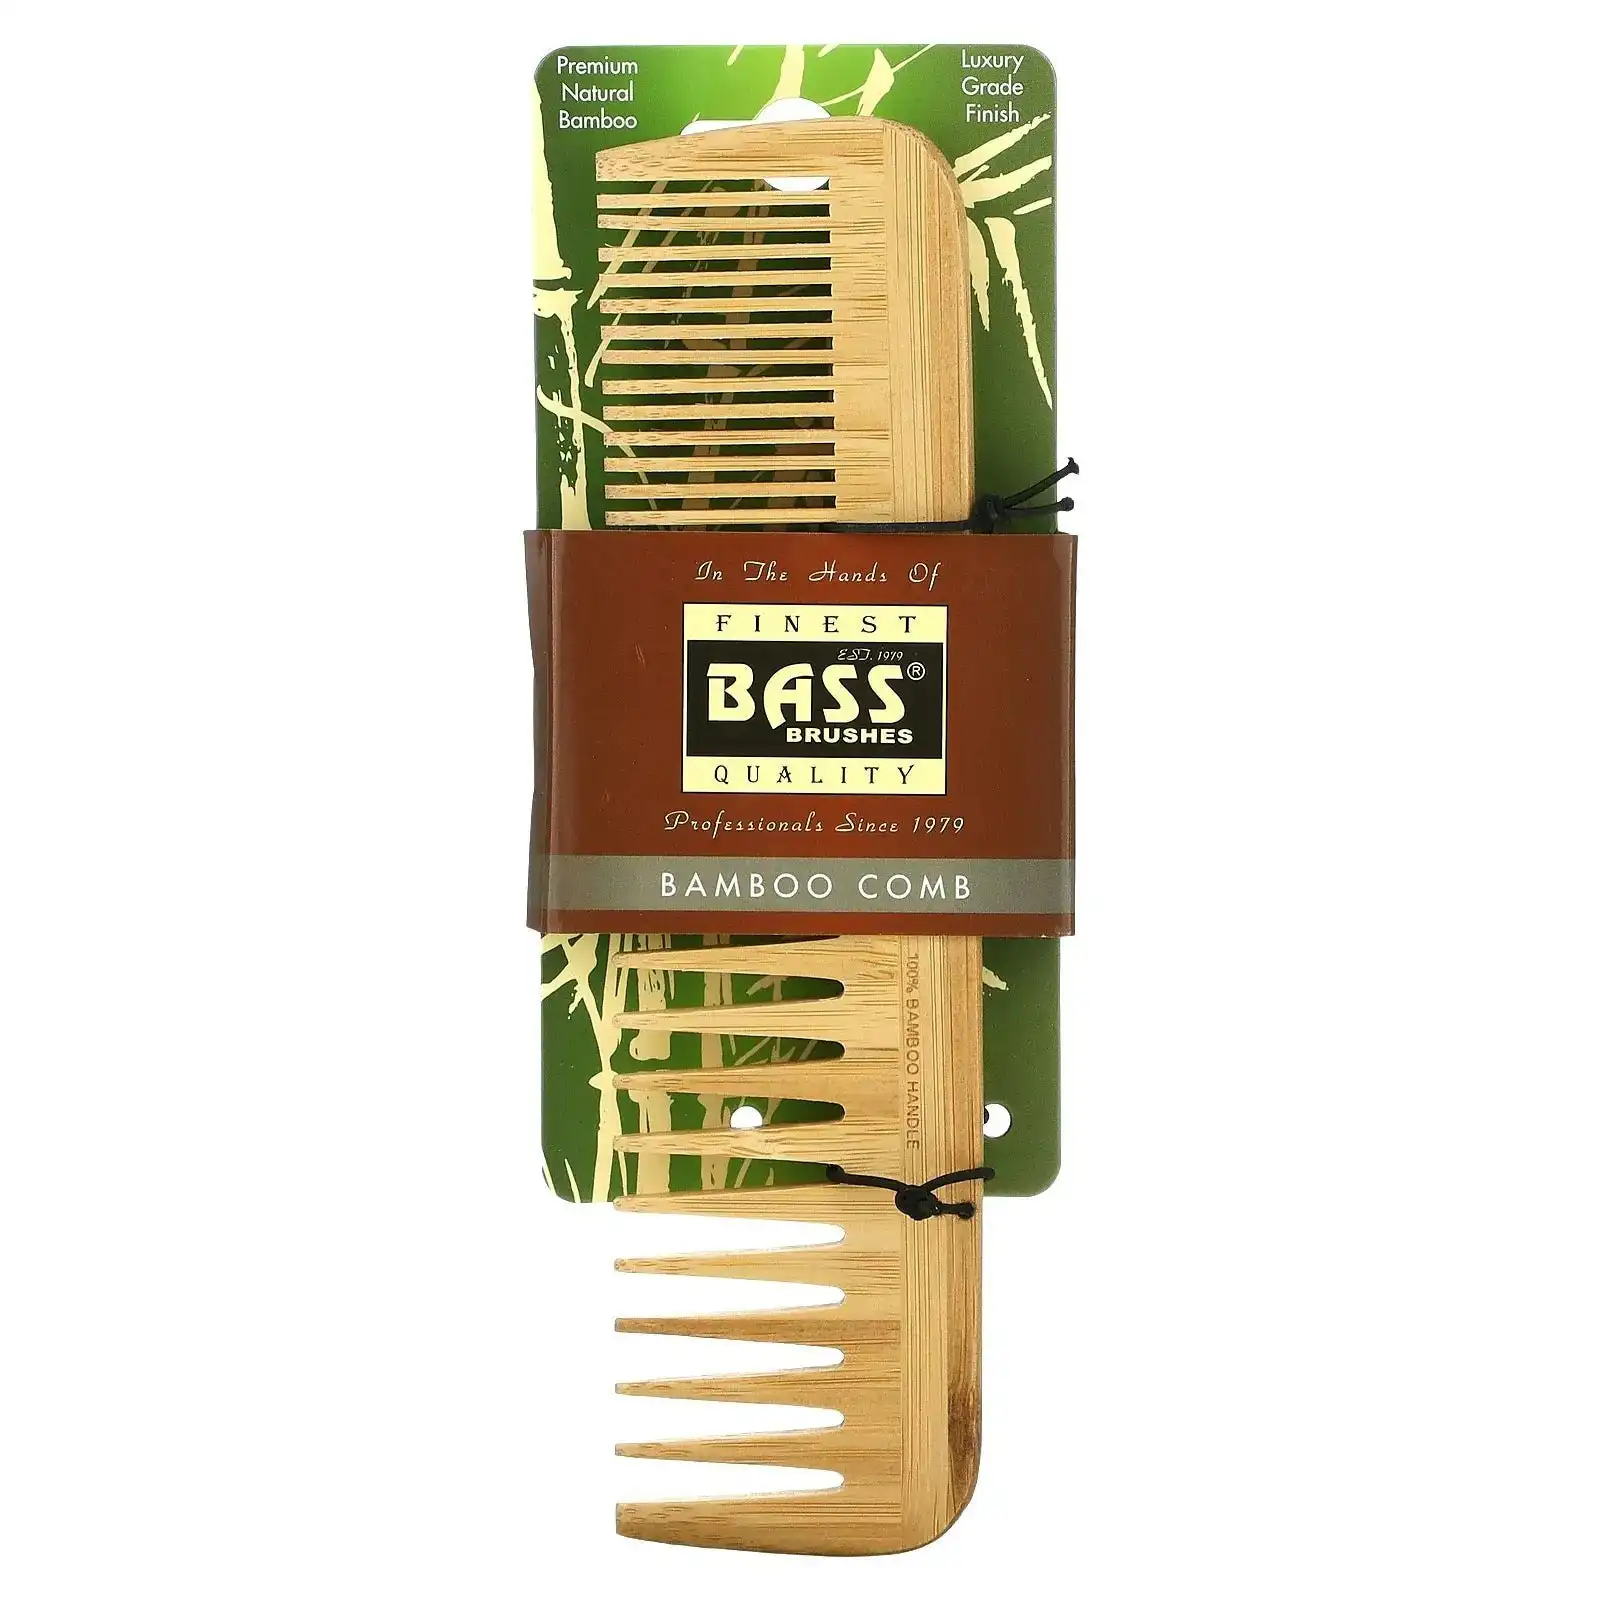 Bass Brushes Bamboo Comb Pocket Size - Fine Tooth 1